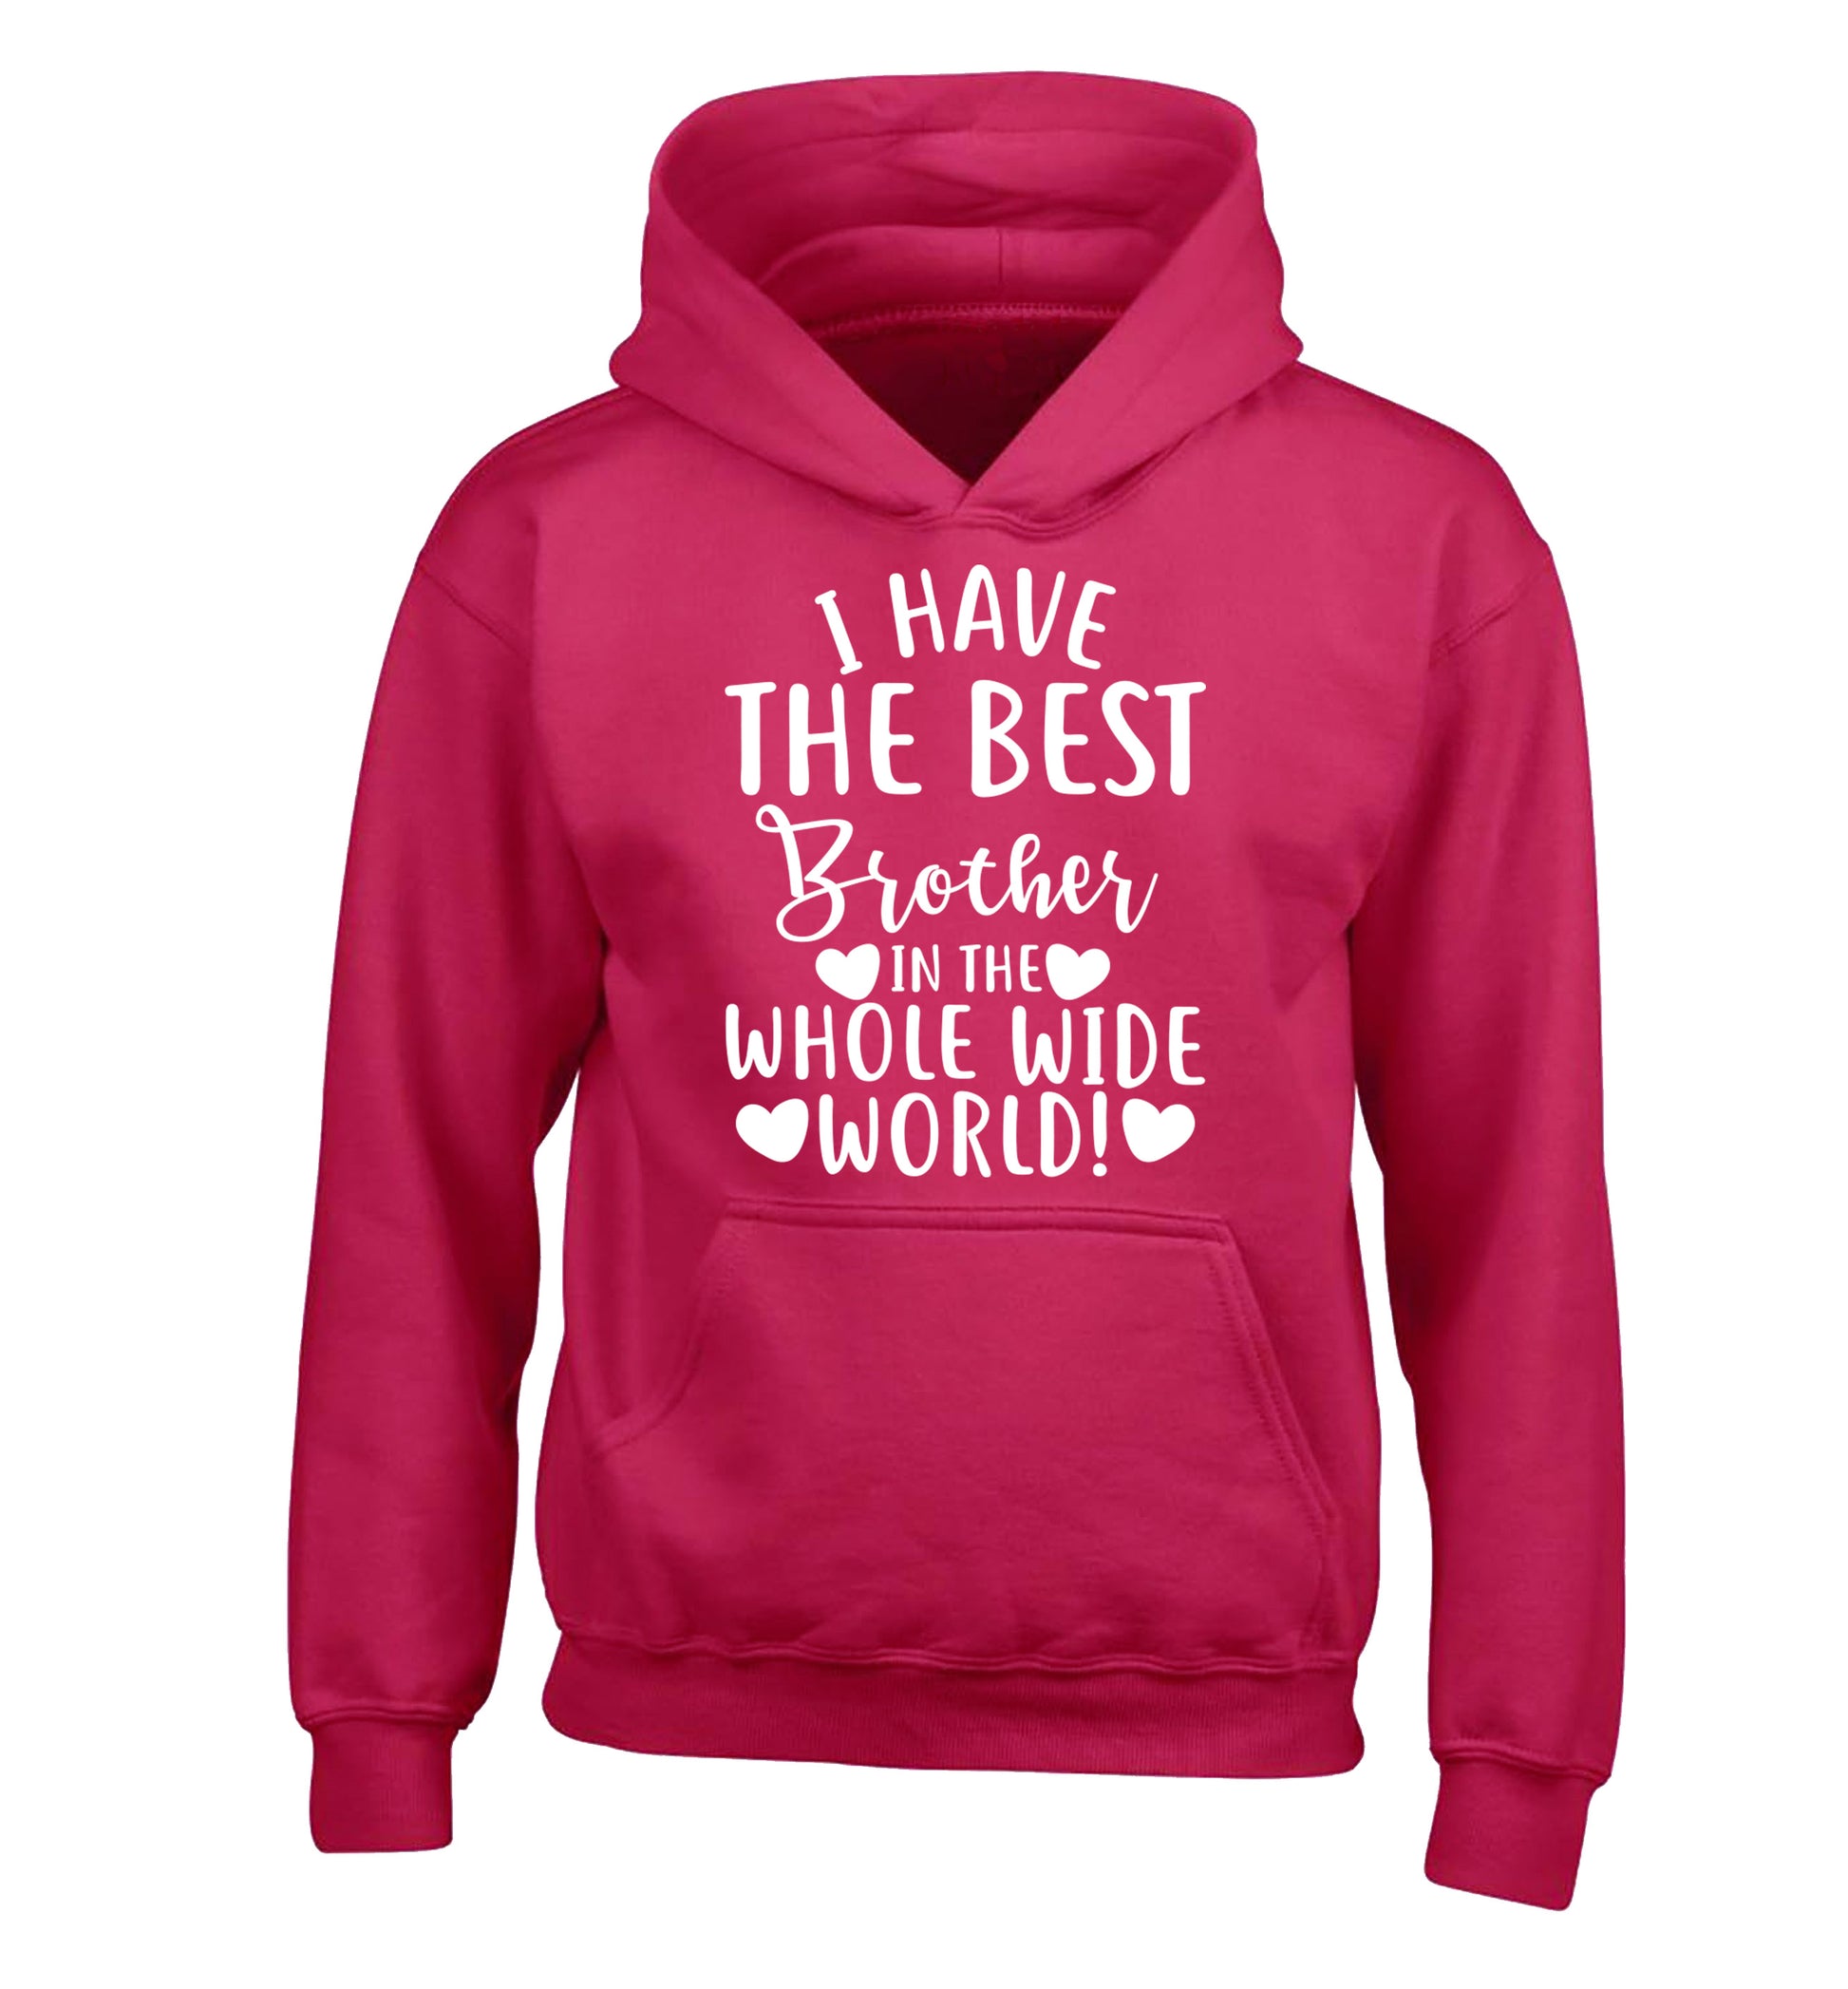 I have the best brother in the whole wide world! children's pink hoodie 12-13 Years